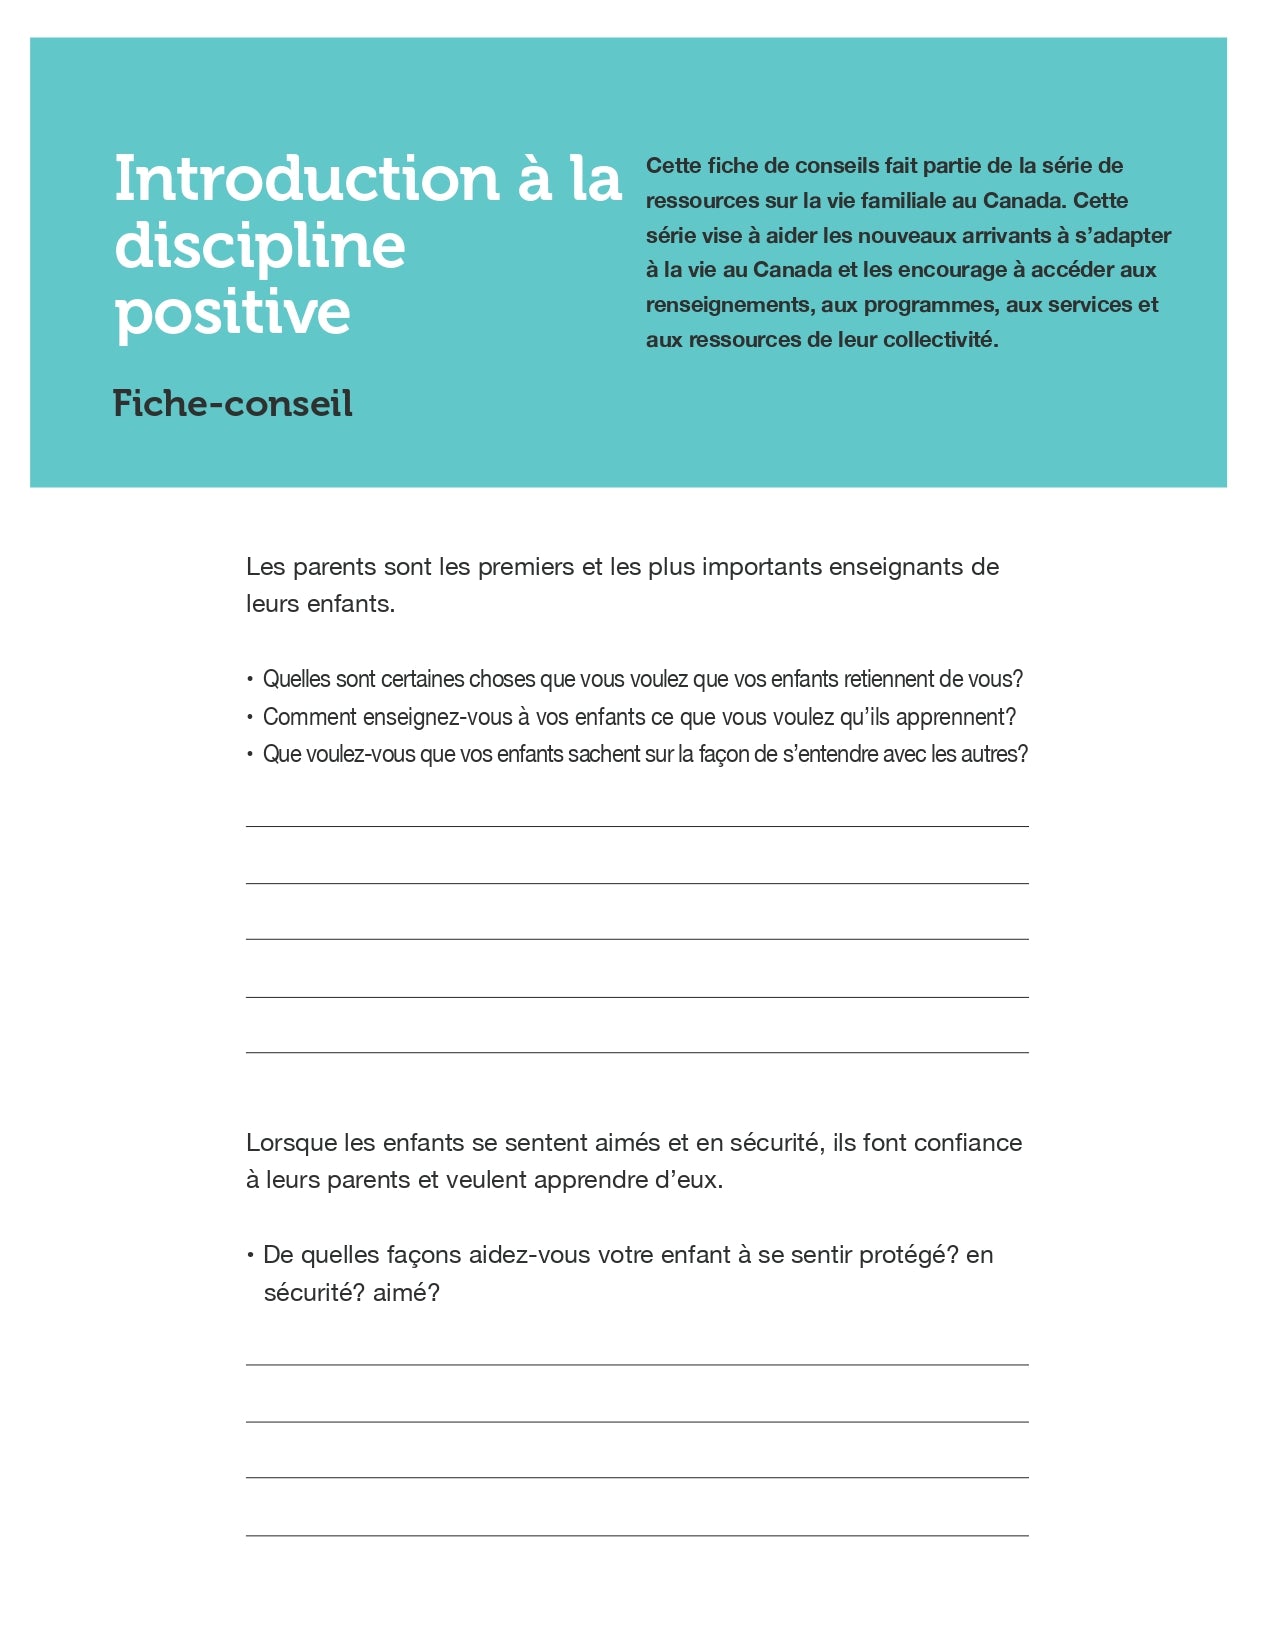 Introduction to Positive Discipline